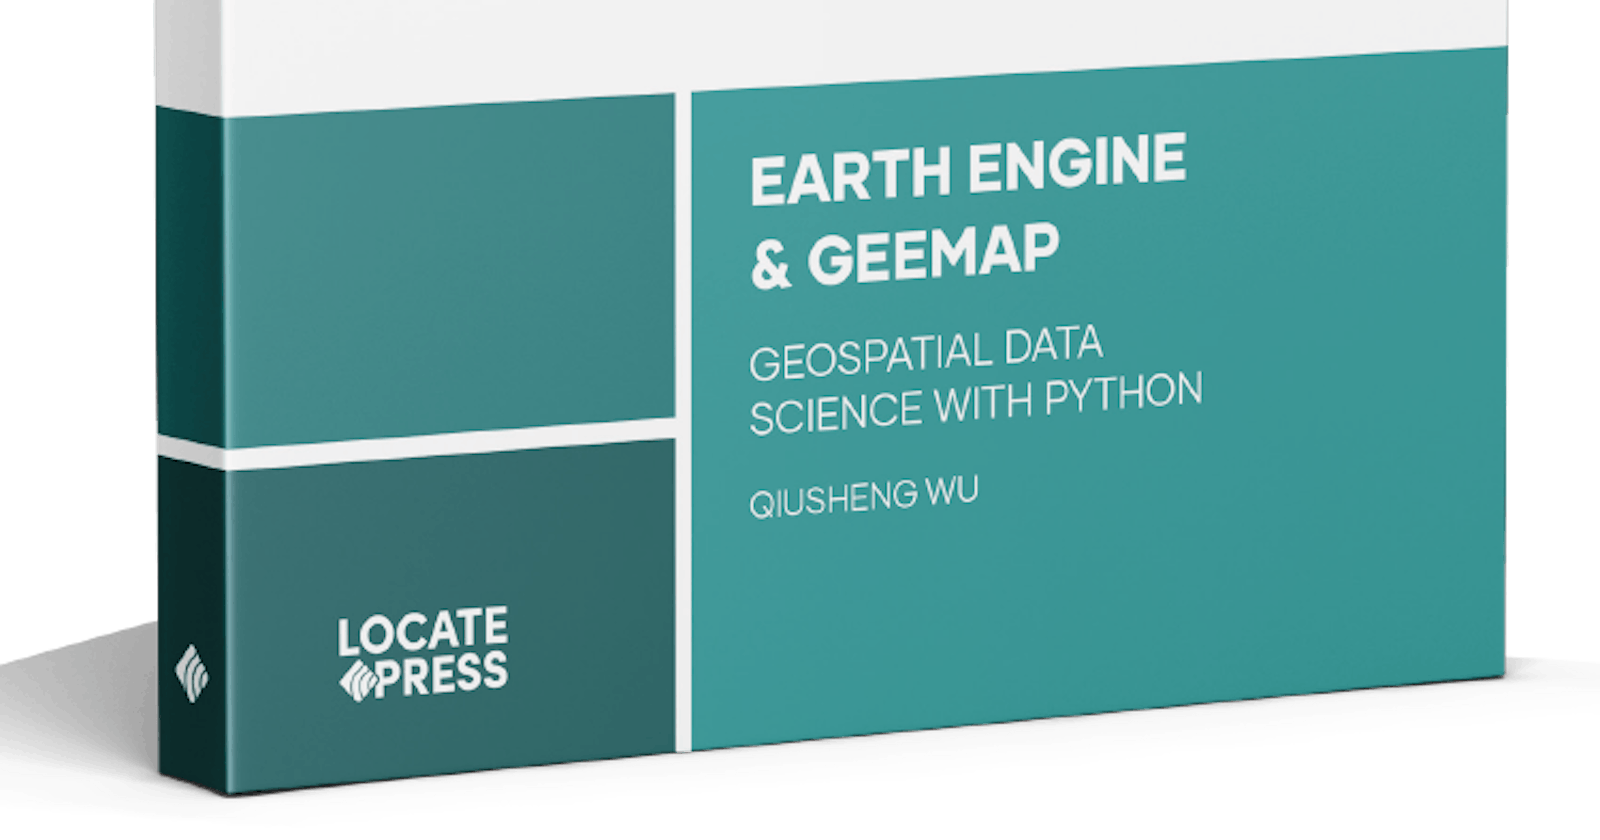 New book release: Earth Engine and Geemap